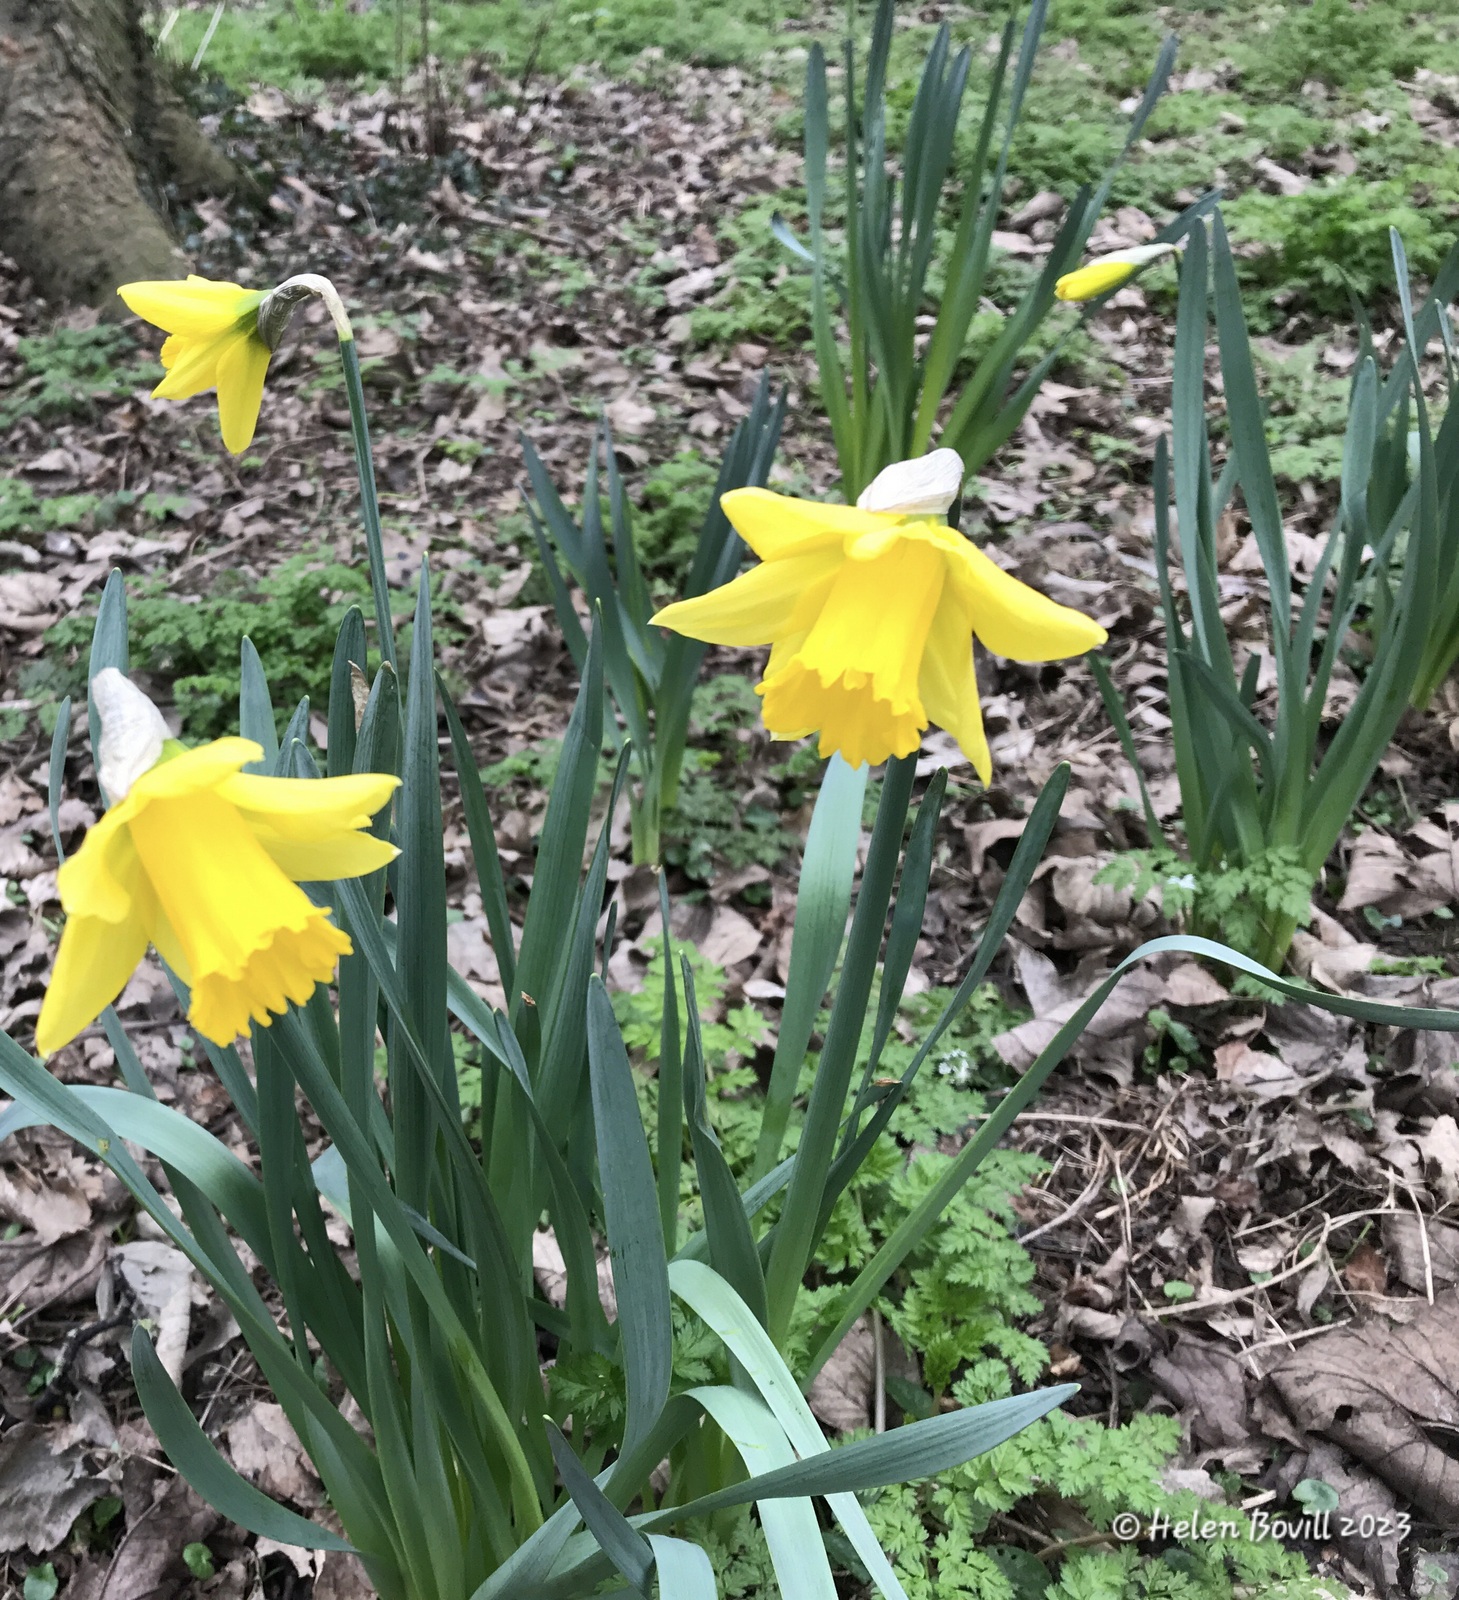 Daffodils growing near the workhouse graves area of the cemetery